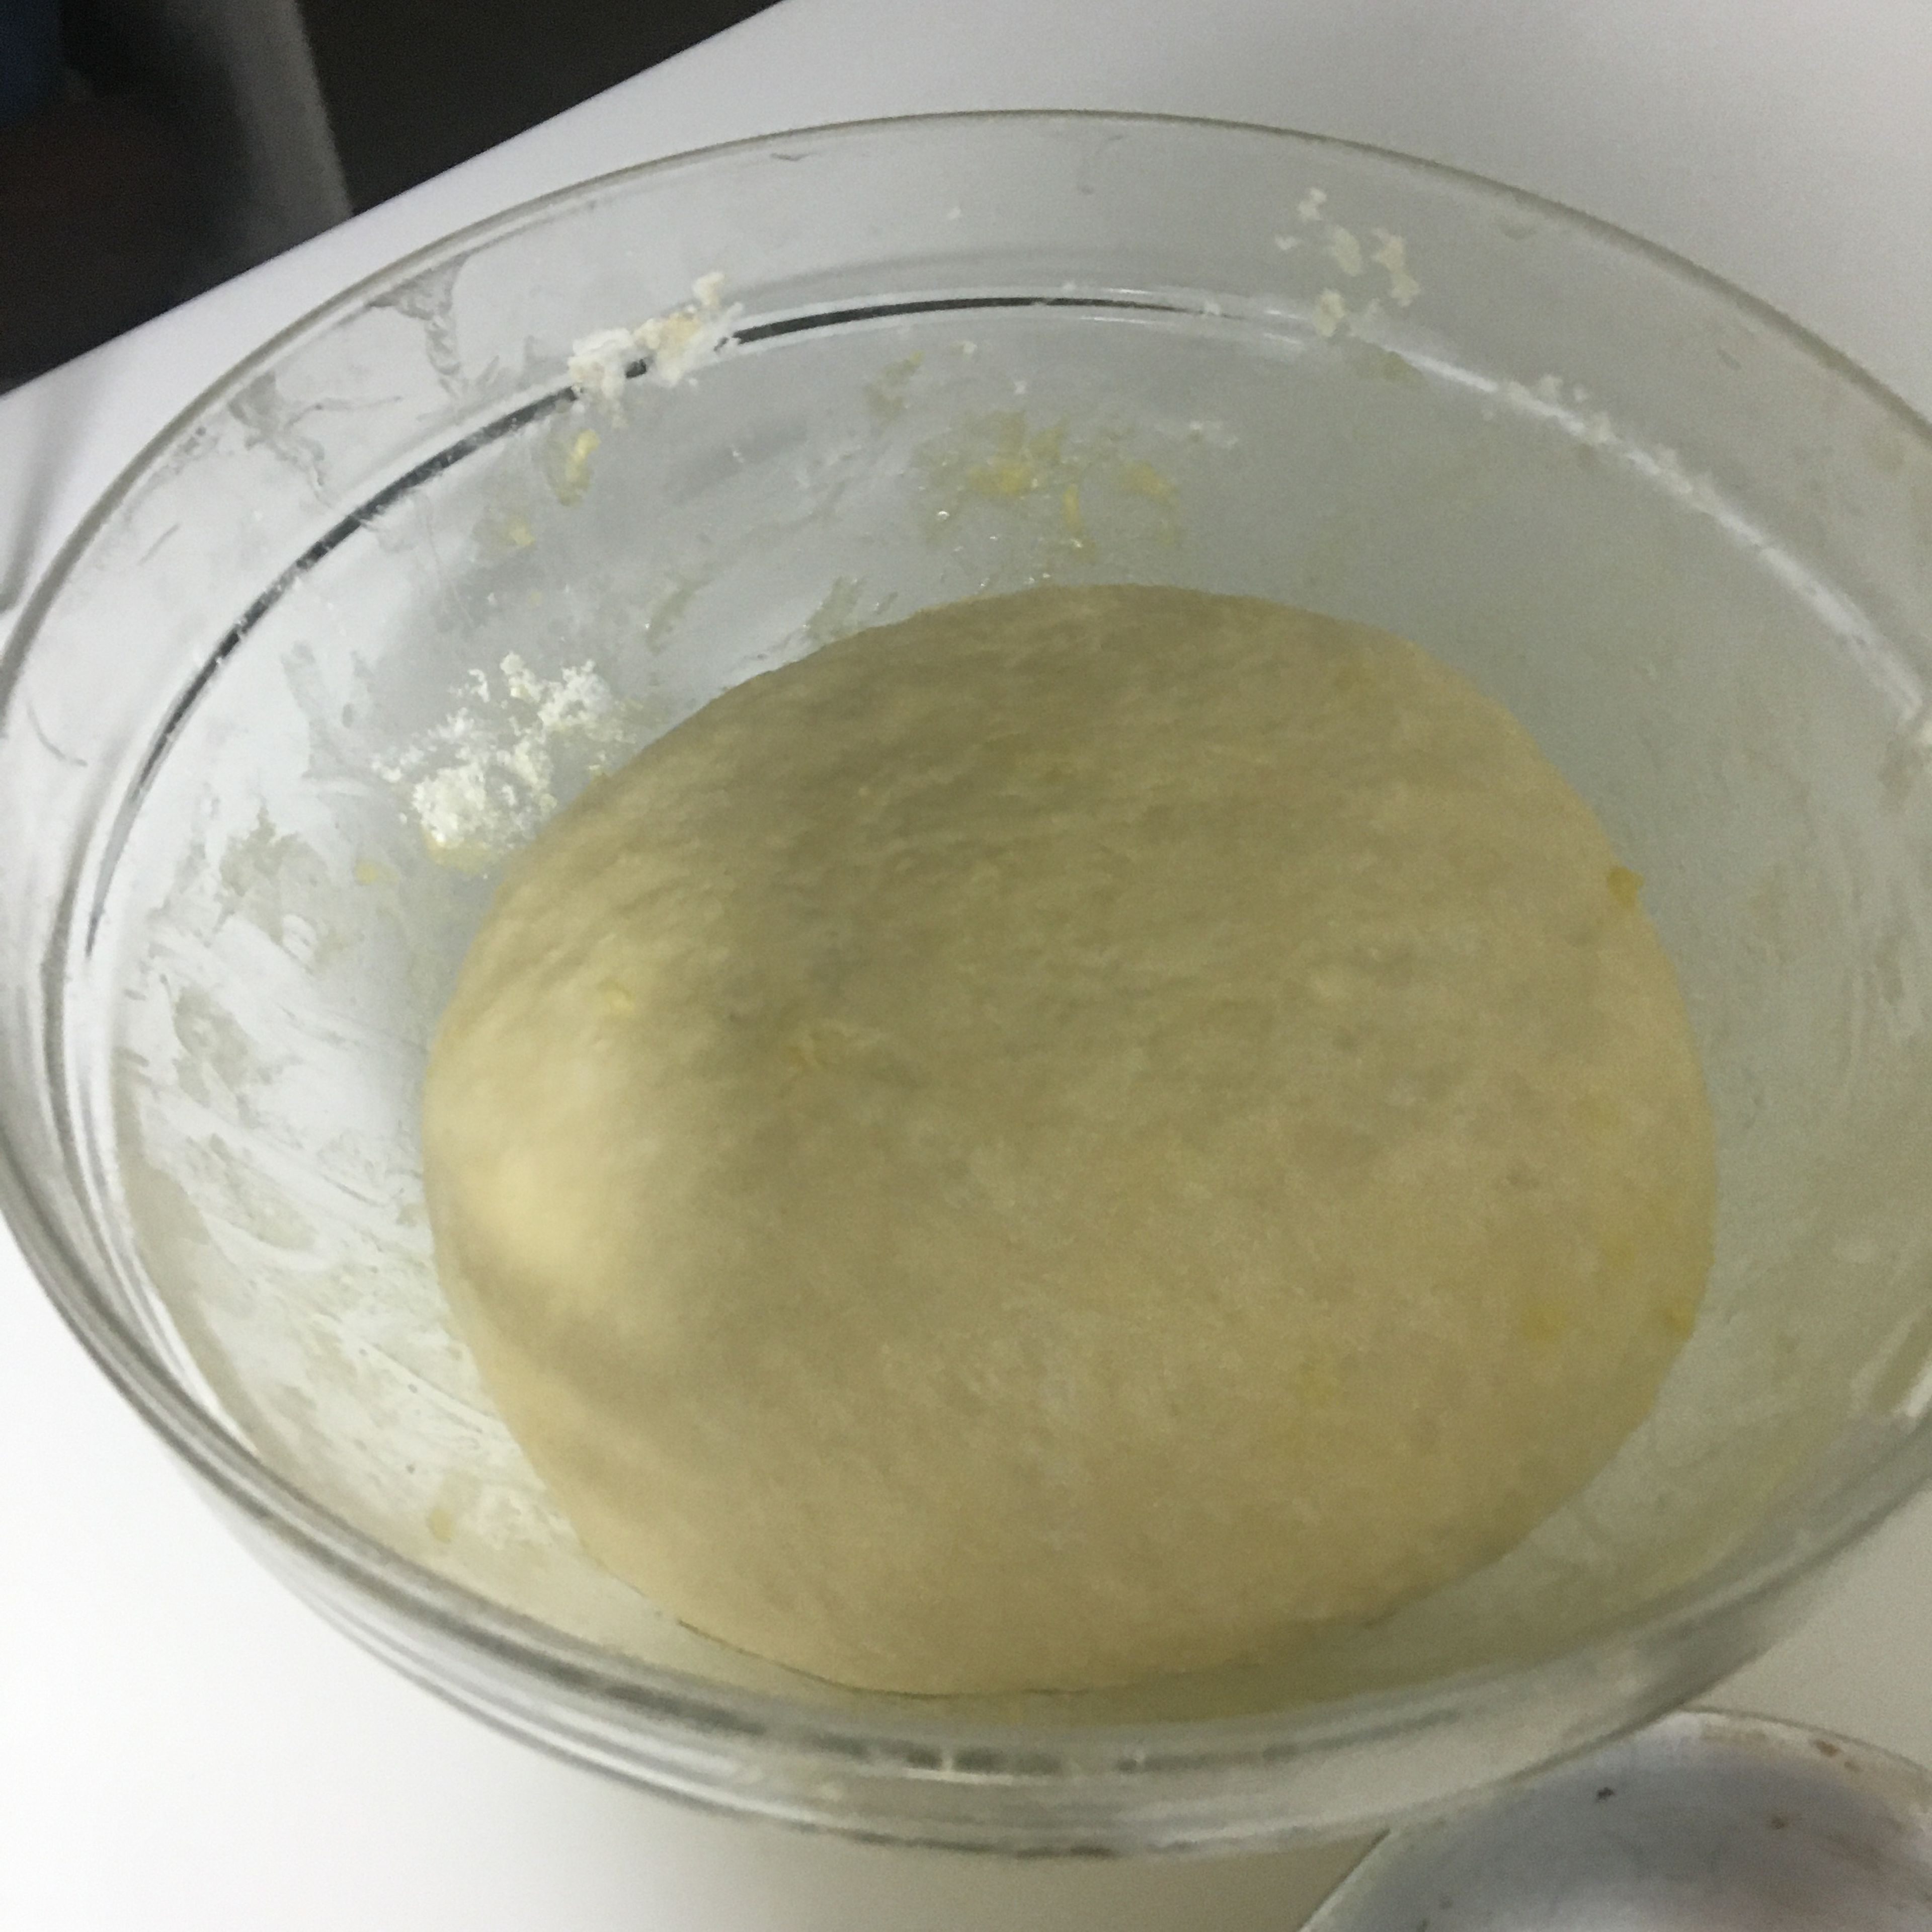 This is what the dough should look like, doubling in size